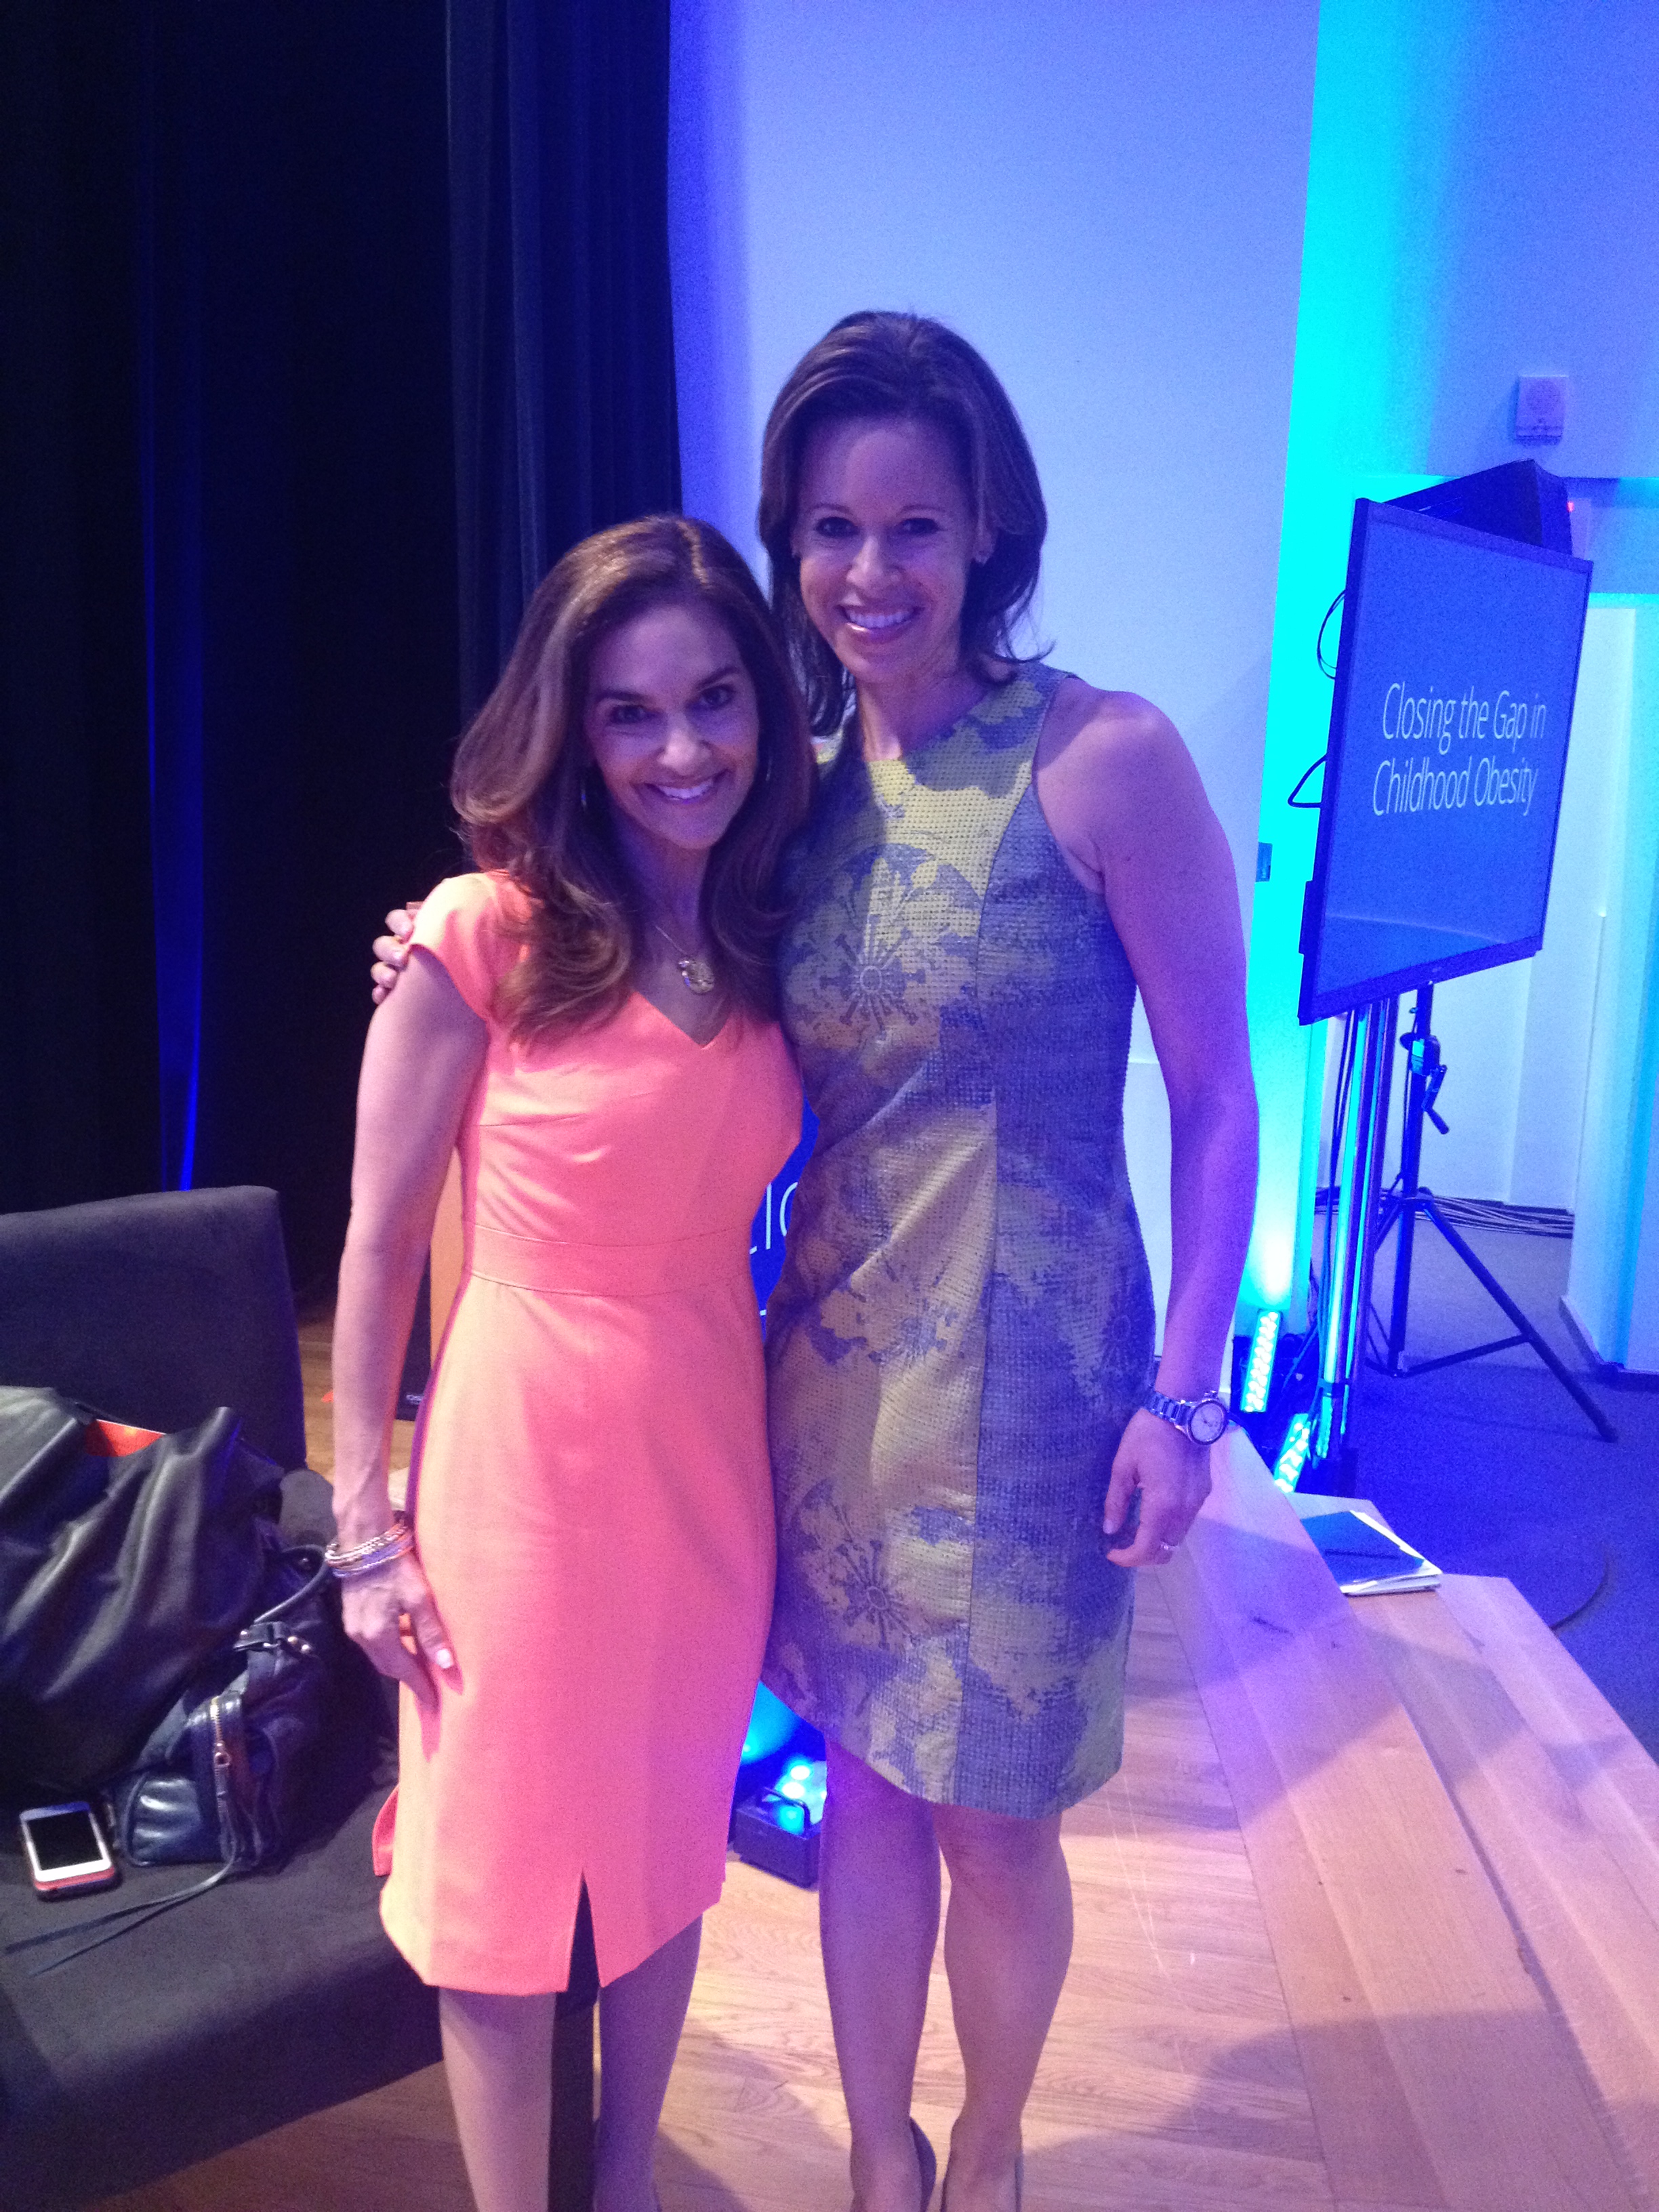 Joy Bauer and Jenna Wolfe, two moderators for the Clinton Forum. Always good to see these two and work with them again!